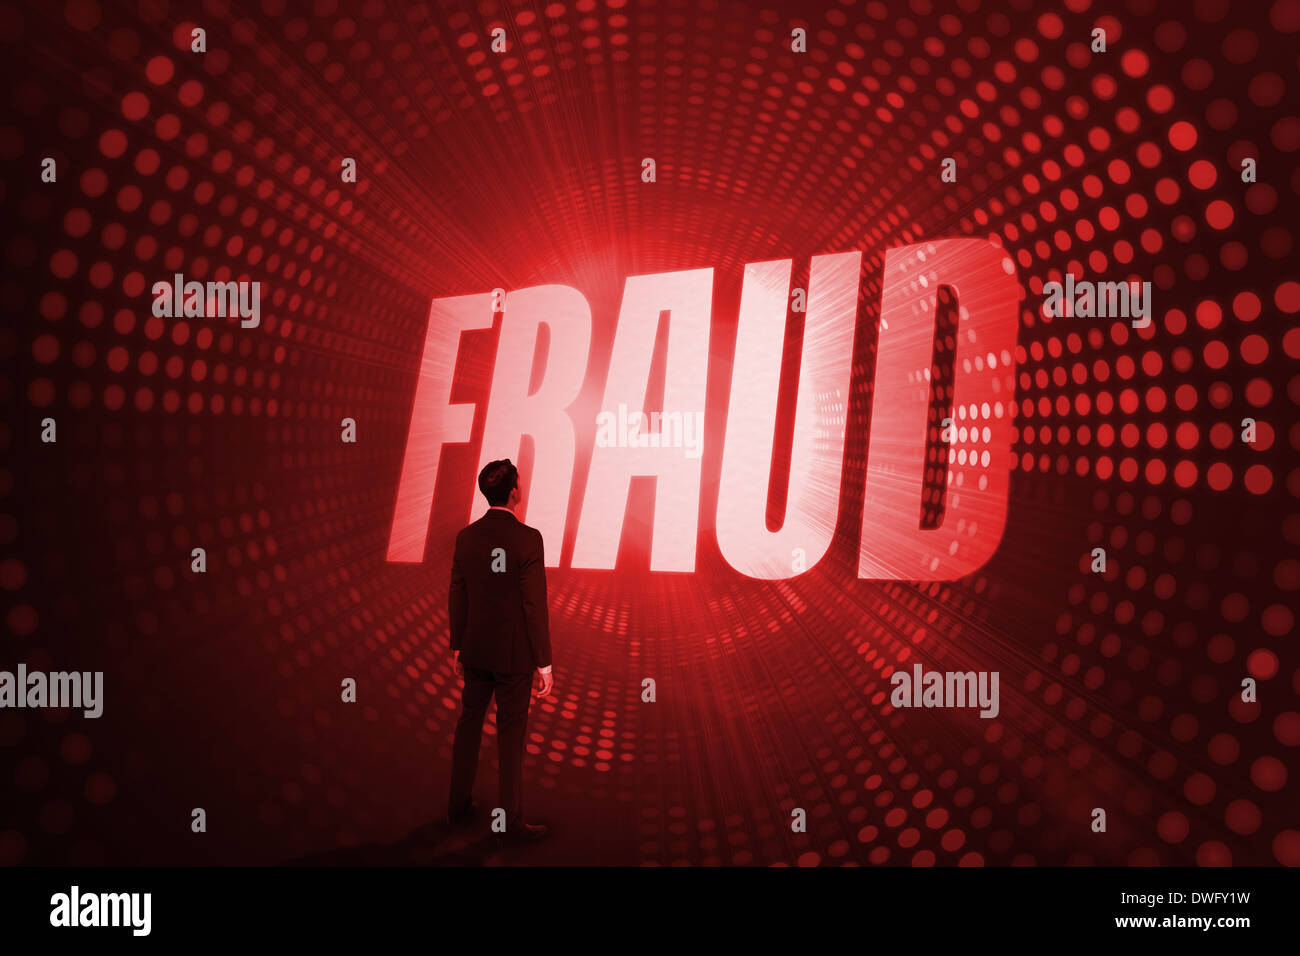 Fraud against red pixel spiral Stock Photo